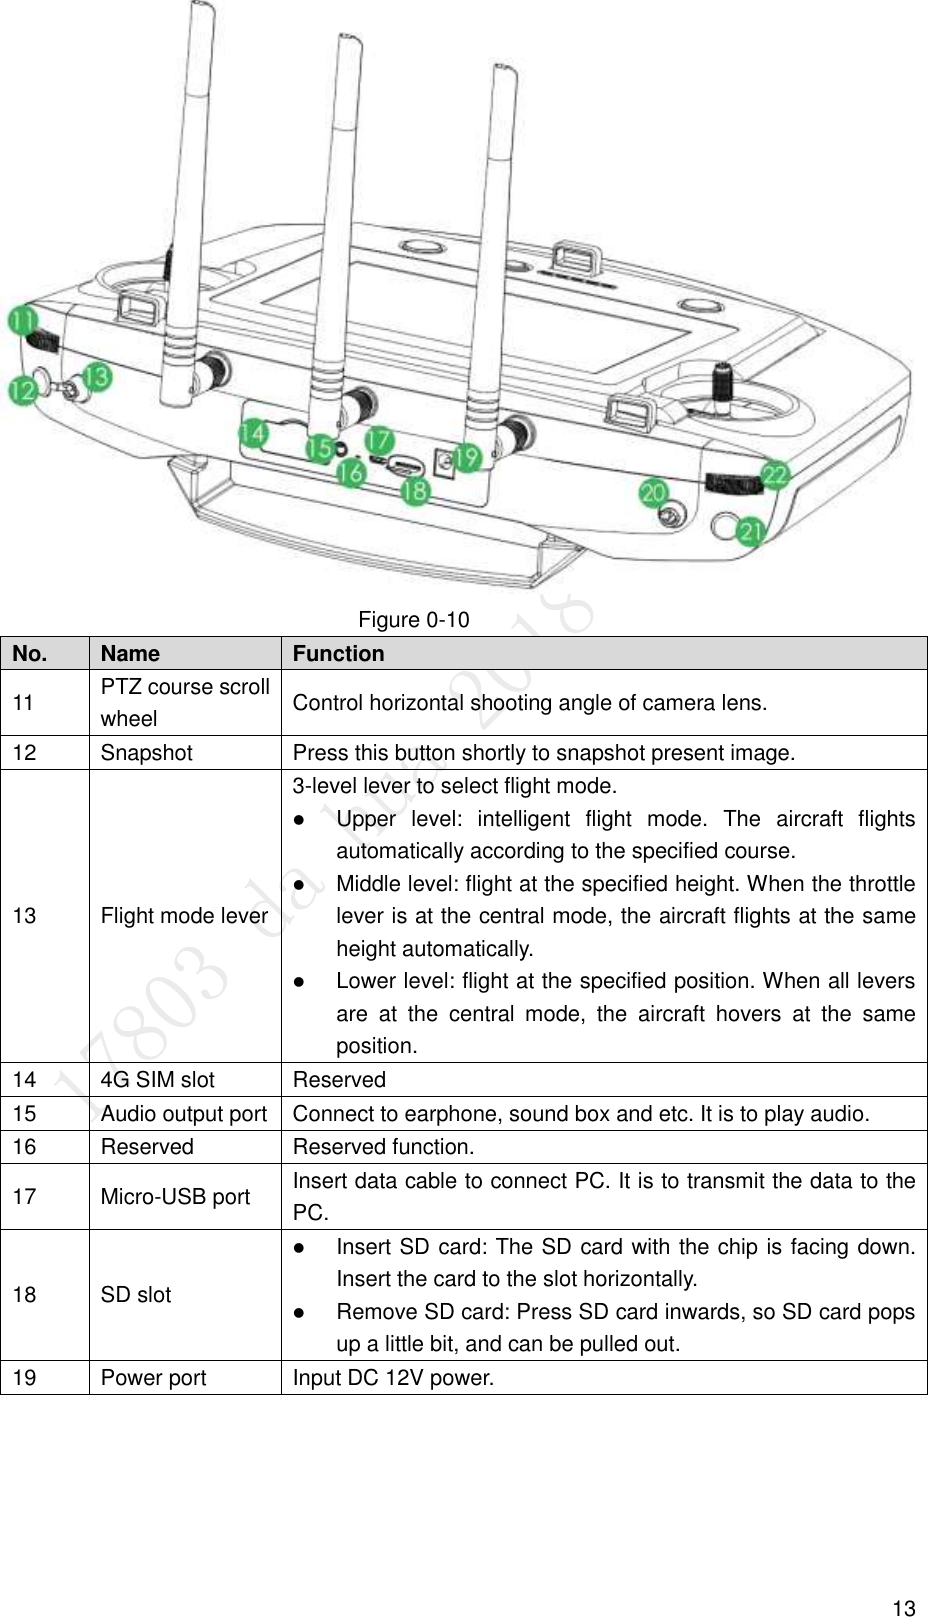  13  Figure 0-10 No. Name Function   11 PTZ course scroll wheel Control horizontal shooting angle of camera lens.   12 Snapshot   Press this button shortly to snapshot present image.   13 Flight mode lever 3-level lever to select flight mode.  Upper  level:  intelligent  flight  mode.  The  aircraft  flights automatically according to the specified course.    Middle level: flight at the specified height. When the throttle lever is at the central mode, the aircraft flights at the same height automatically.    Lower level: flight at the specified position. When all levers are  at  the  central  mode,  the  aircraft  hovers  at  the  same position.   14 4G SIM slot Reserved 15 Audio output port Connect to earphone, sound box and etc. It is to play audio.   16 Reserved   Reserved function. 17 Micro-USB port Insert data cable to connect PC. It is to transmit the data to the PC. 18 SD slot  Insert SD card: The SD card with the chip is facing down. Insert the card to the slot horizontally.    Remove SD card: Press SD card inwards, so SD card pops up a little bit, and can be pulled out. 19 Power port Input DC 12V power. 